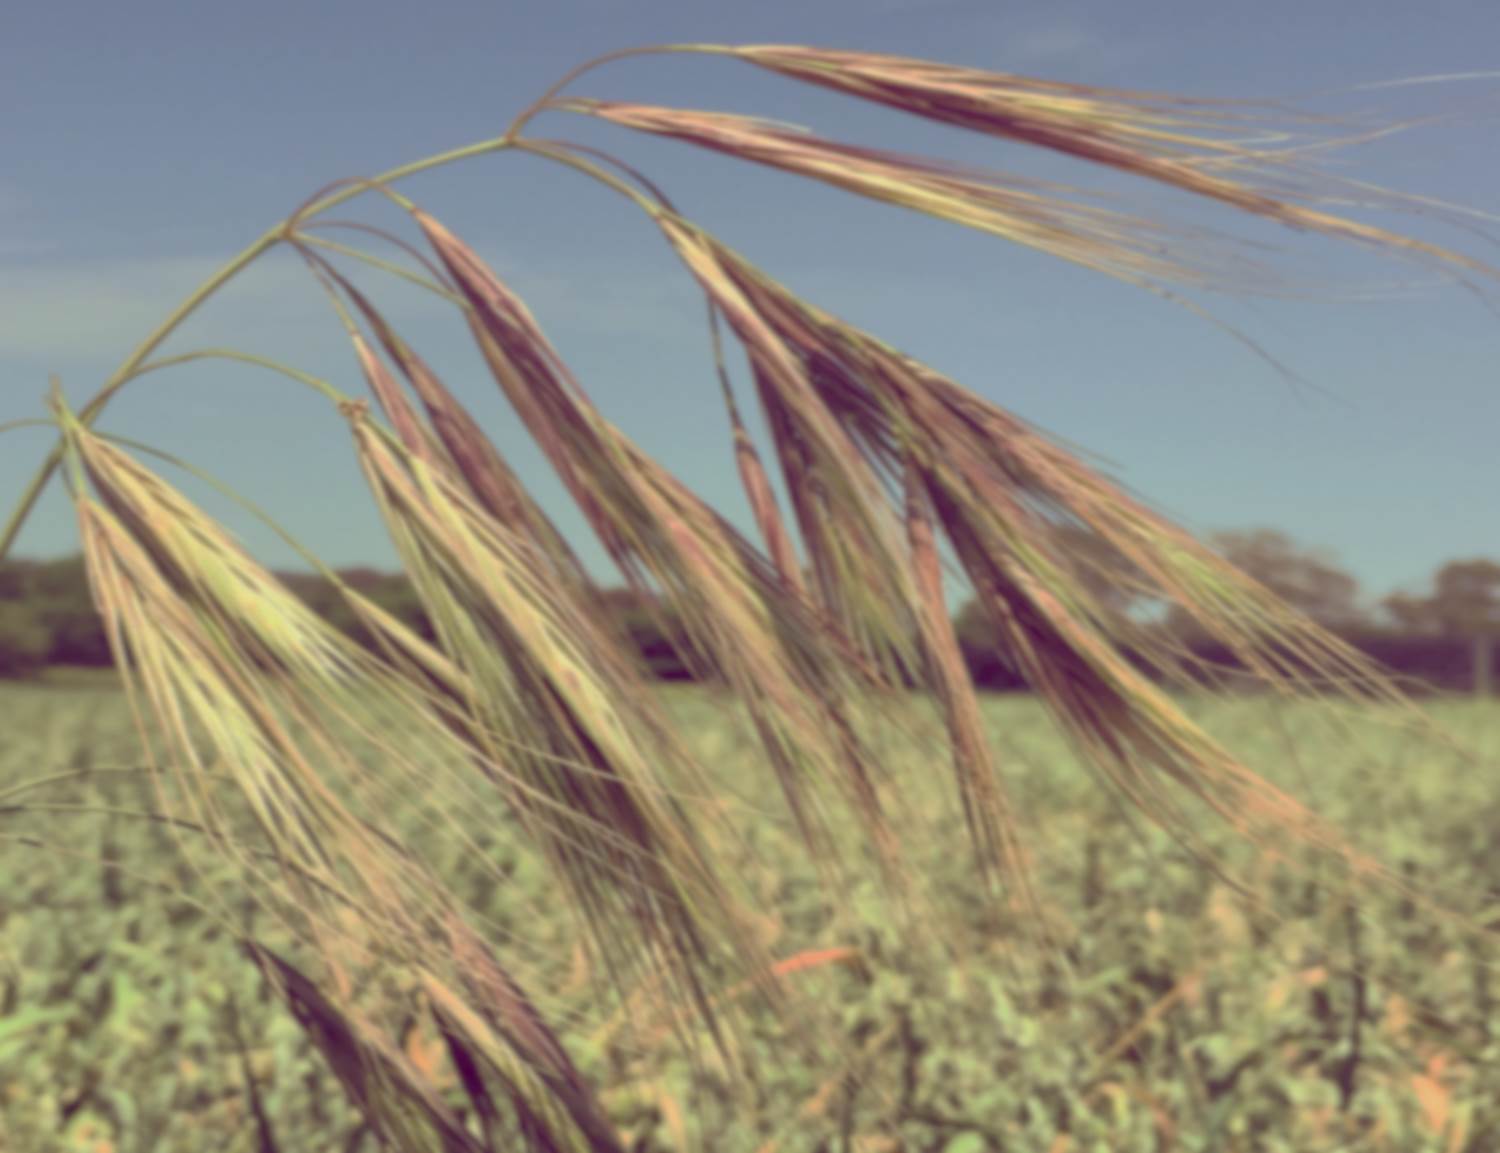 Brome grass in a field of wheat